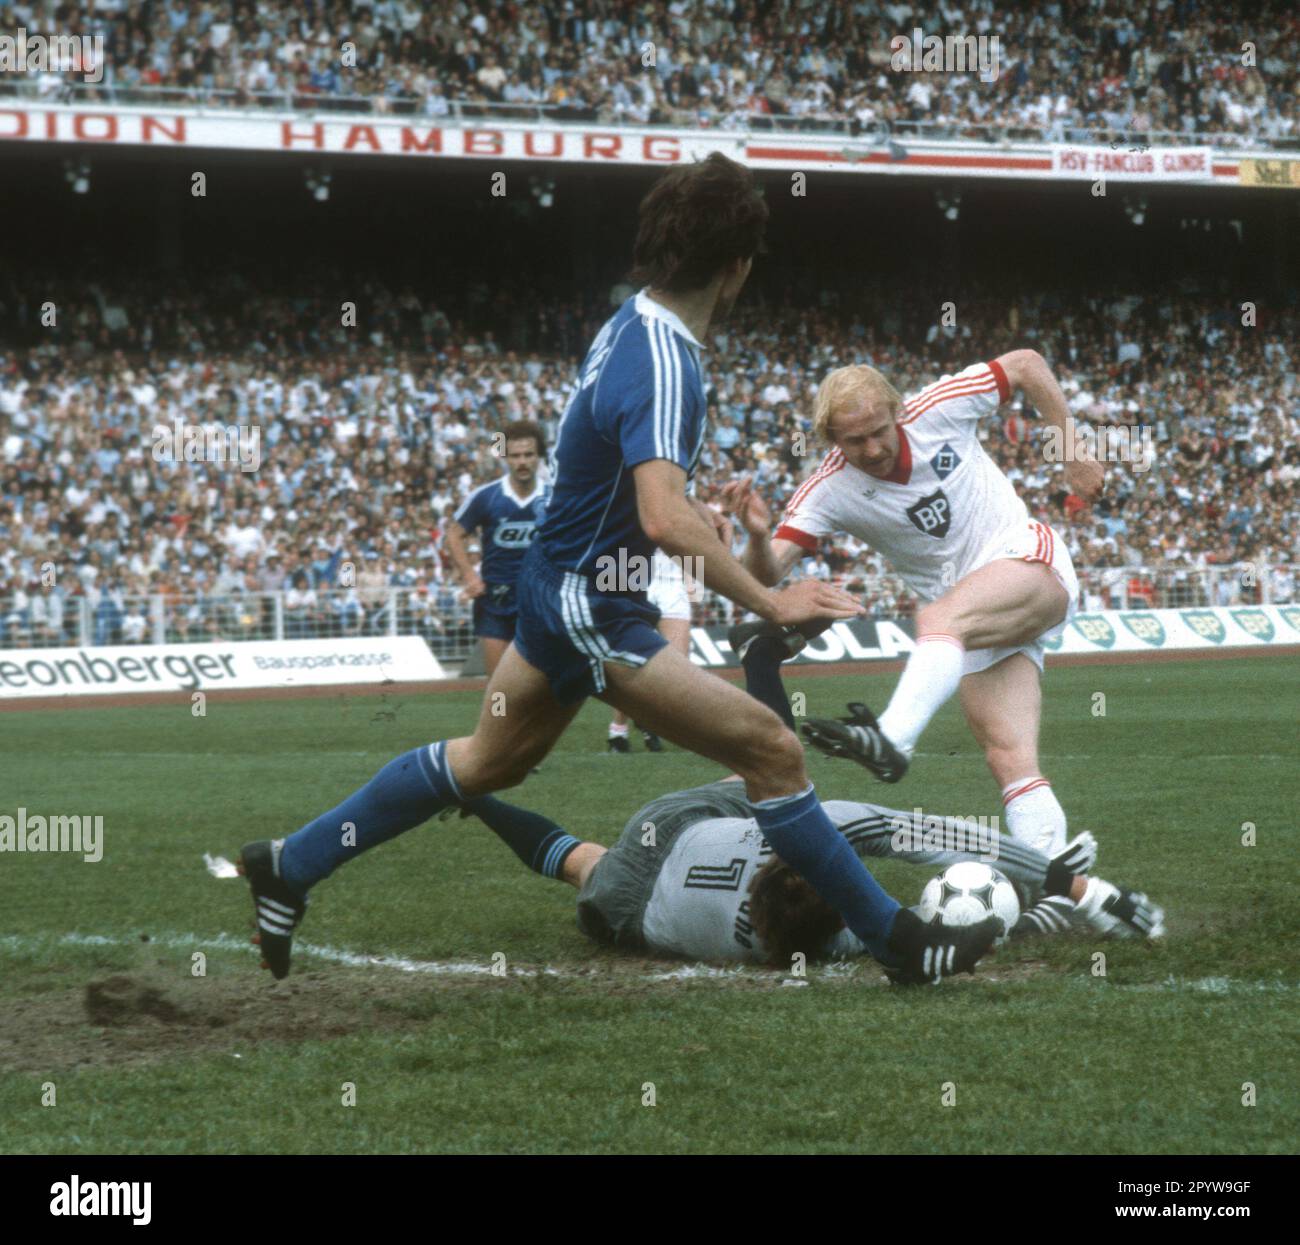 FB - BL , 34. matchday , Hamburger SV - Karlsruher SC 3:3 /29.05.1982/ Lars Bastrup (HSV/right) shoots against goalkeeper Rudolf Wimmer (KSC/on the ground) For journalistic purposes only! Editorial use only ! [automated translation] Stock Photo